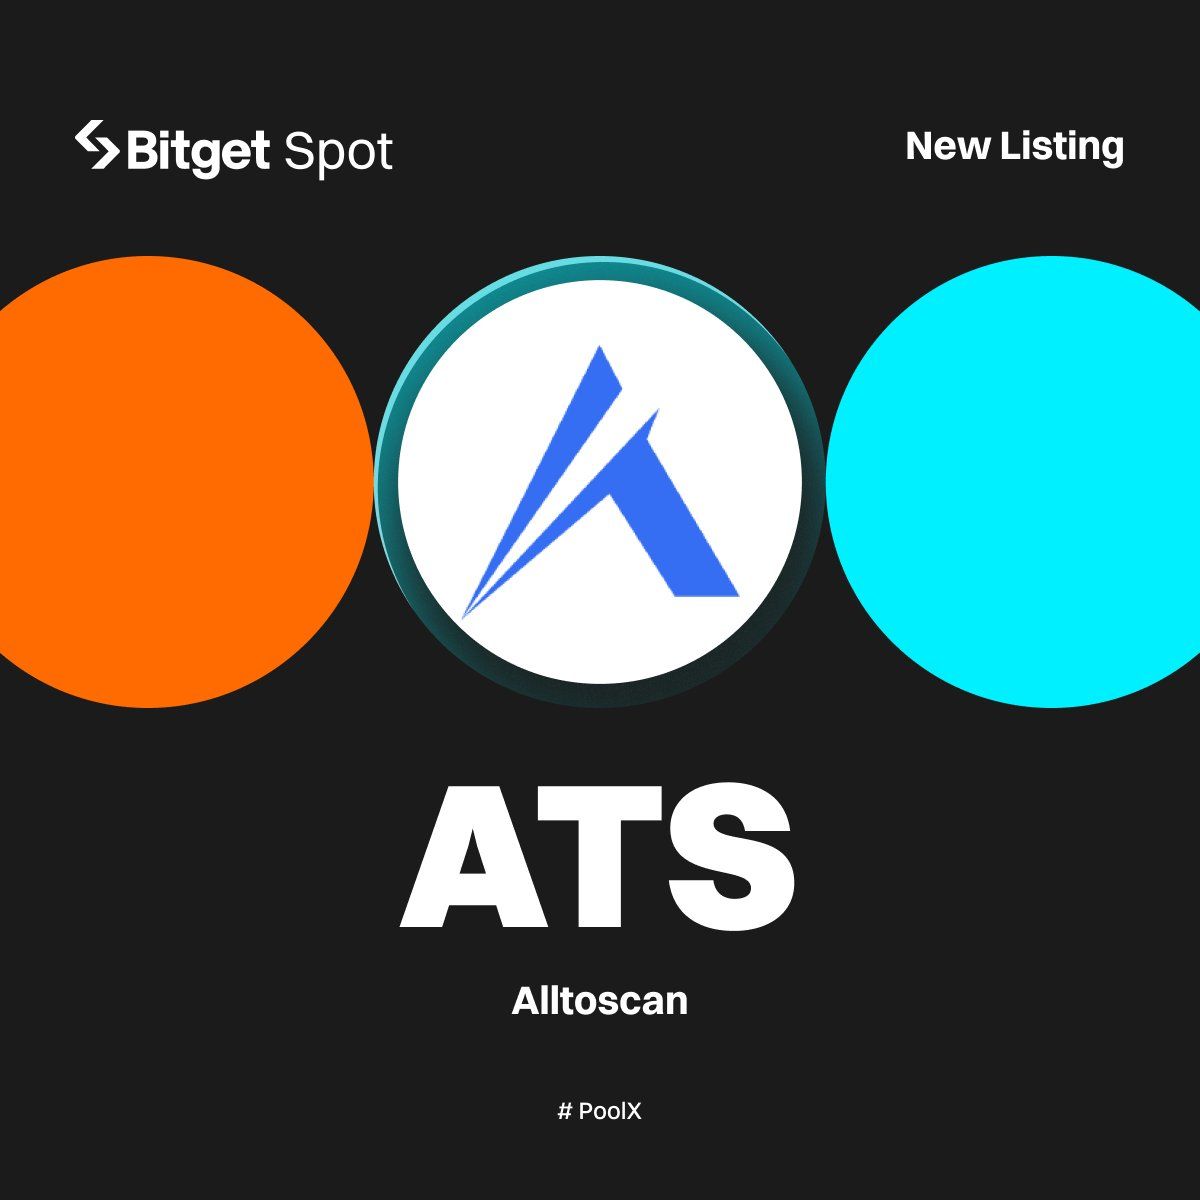 $ATS Token will be available for trading on the Bitget exchange on May 13th! The project is currently traded on mexc.com and gate.io and has been performing impressively since its listing. I expect a huge price increase with the listing on Bitget.…